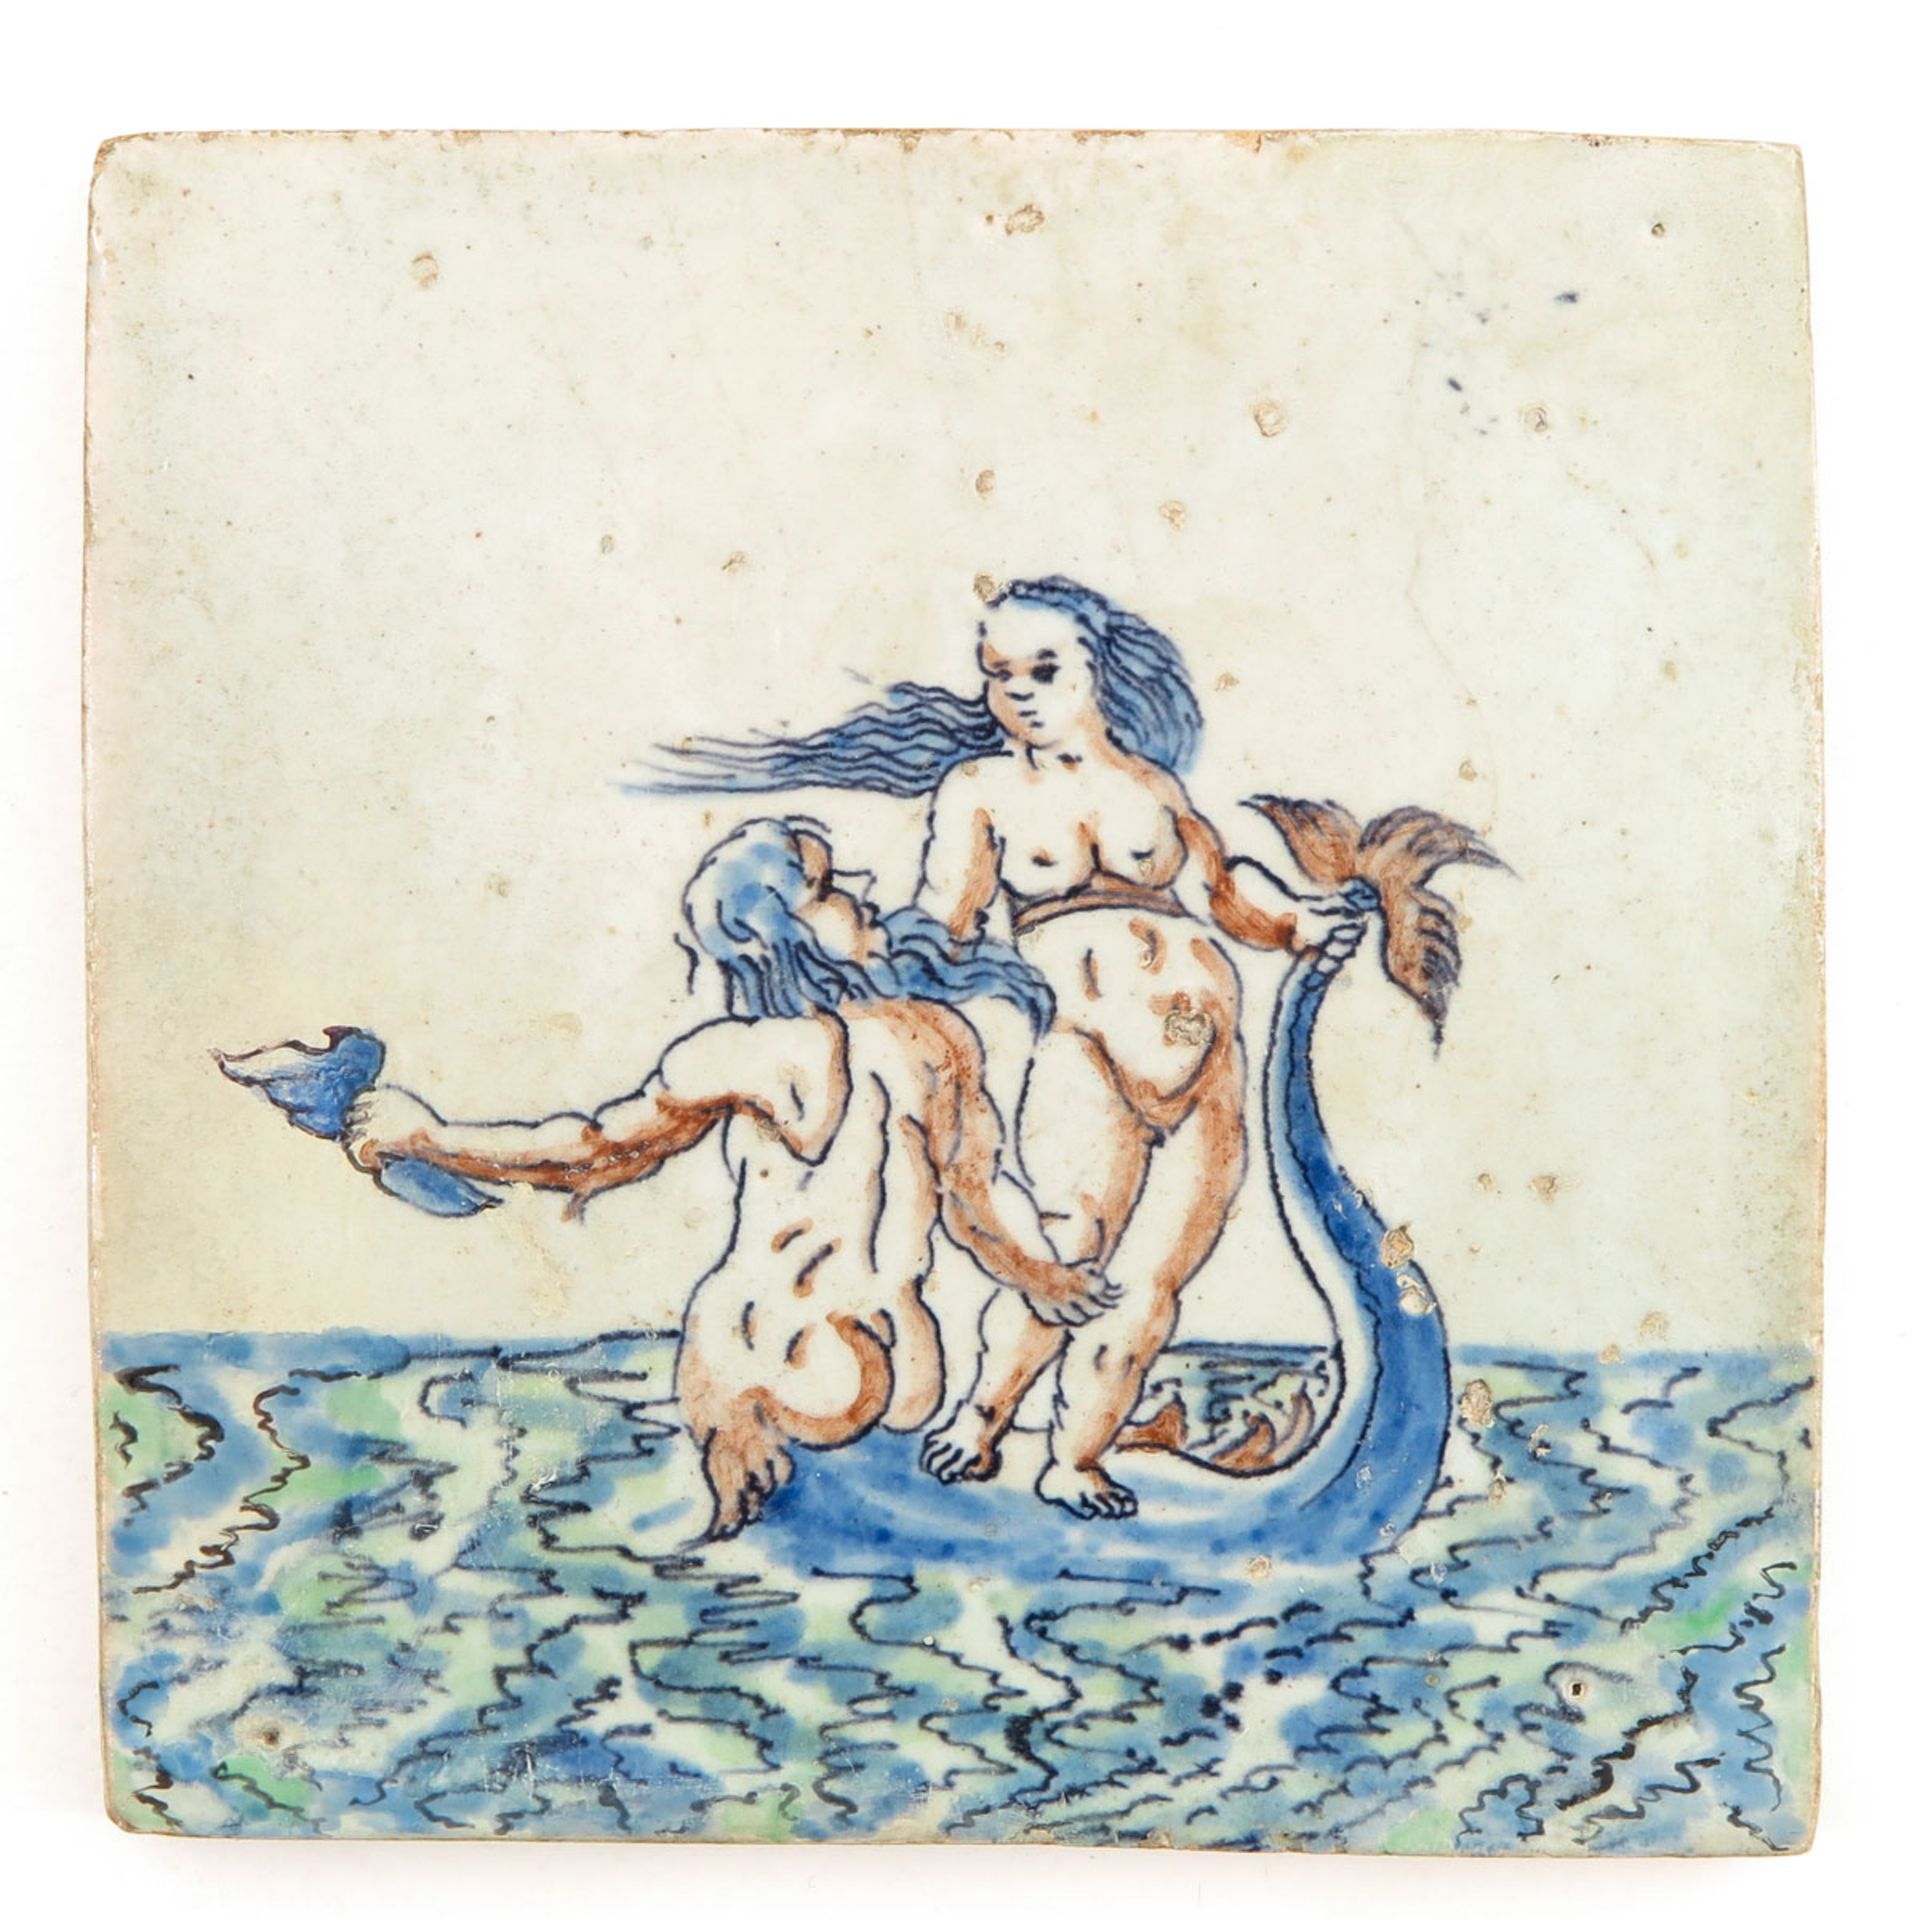 An Extremely Rare 17th Century Tile